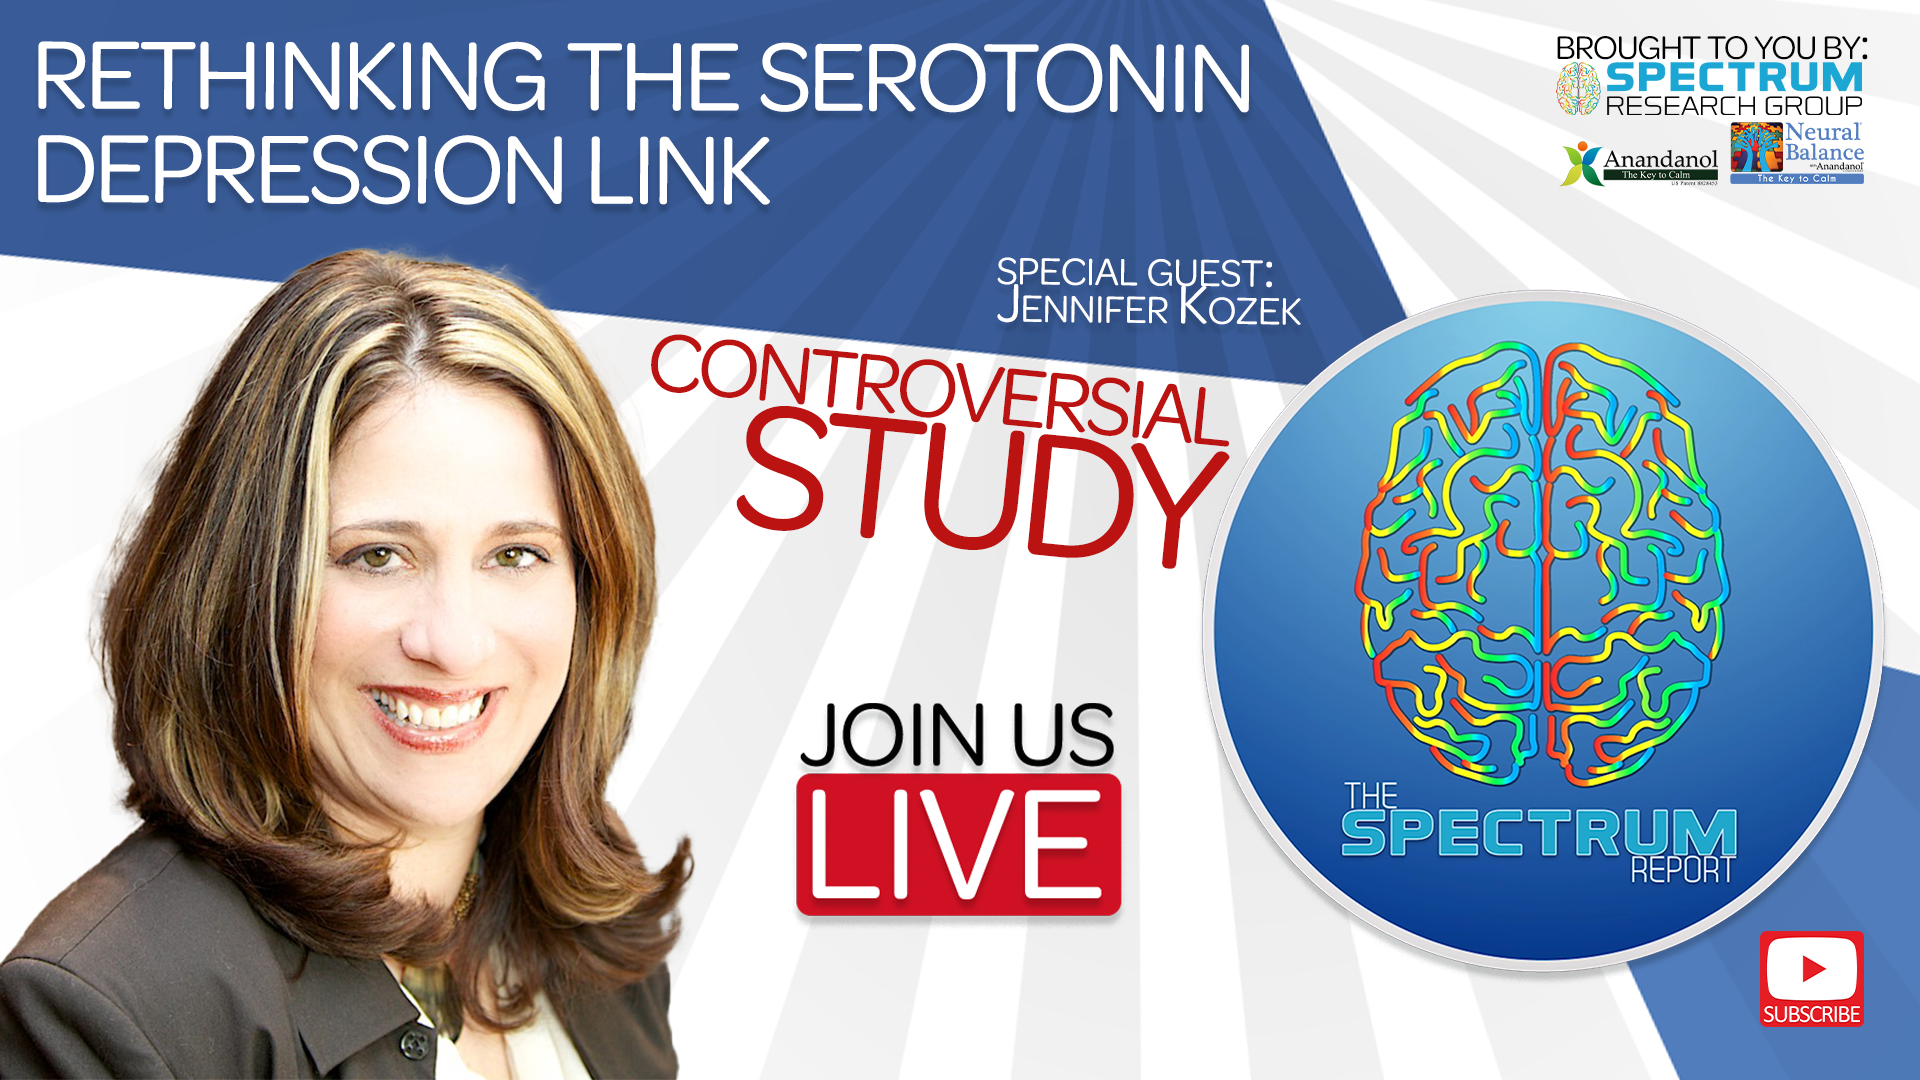 Controversial Study Casts Doubt on the Serotonin - Depression Link